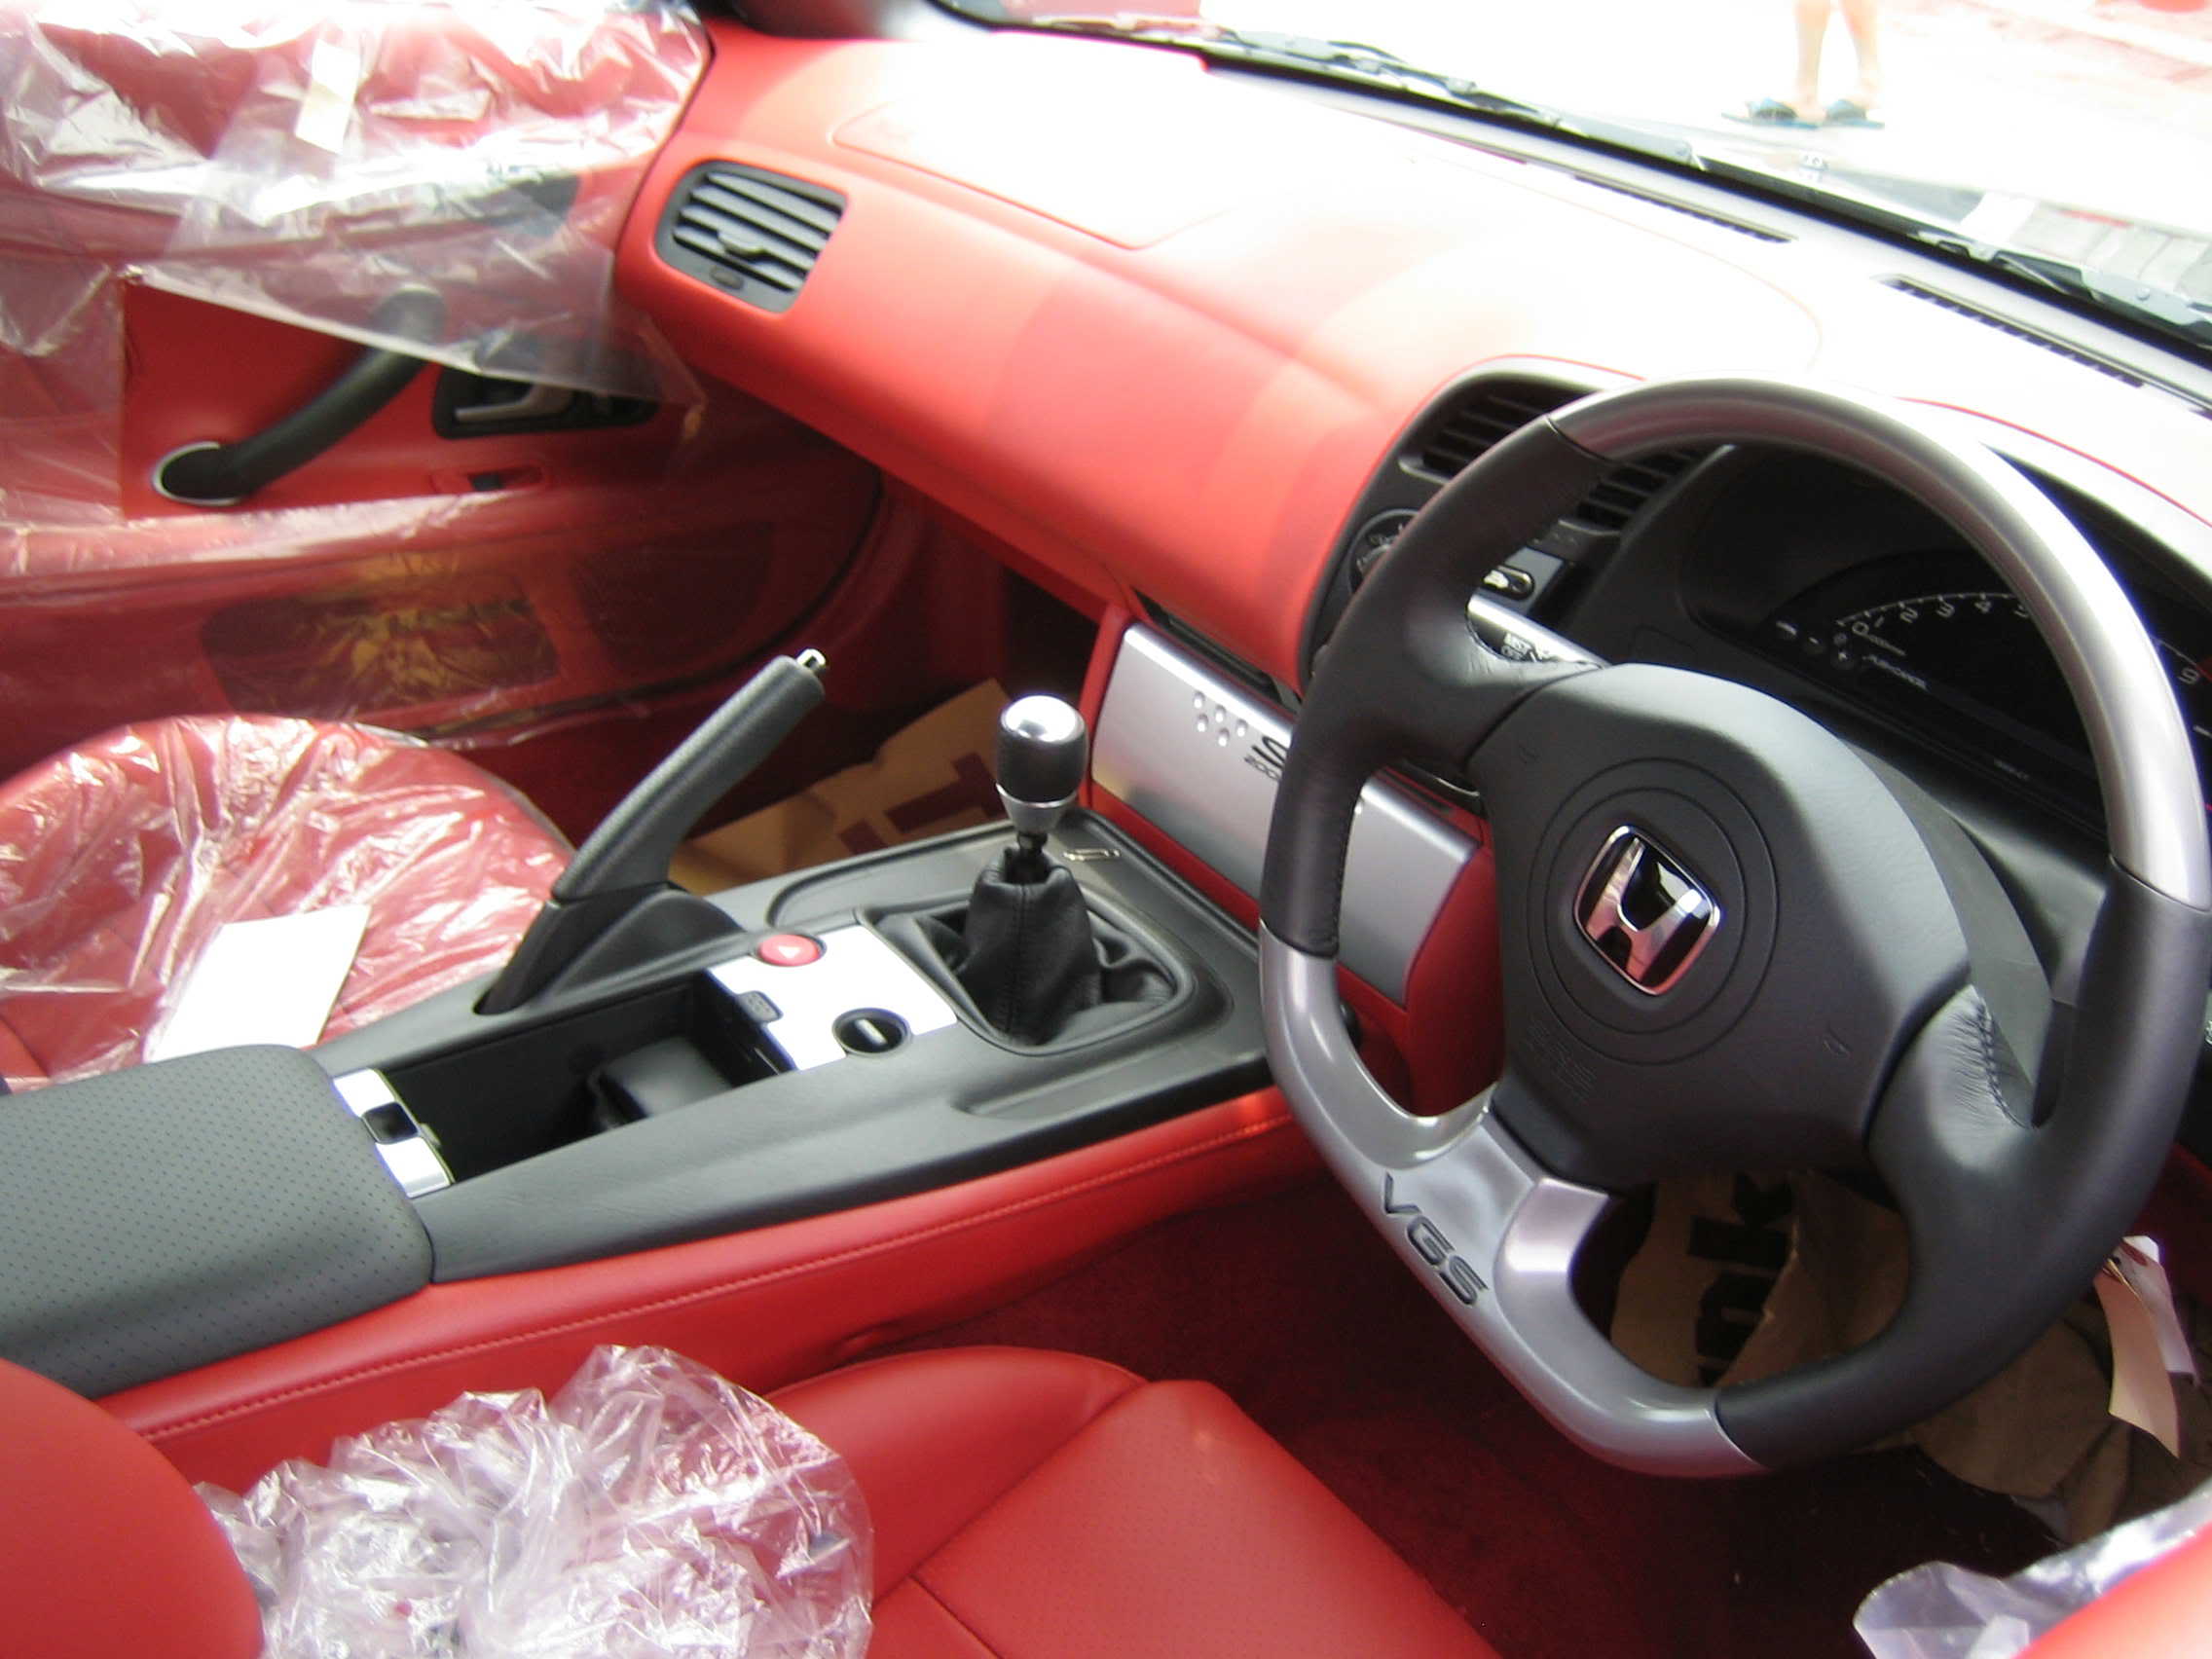 Ap1 S2k red interior on white :) mm good., Yeah I know edit…